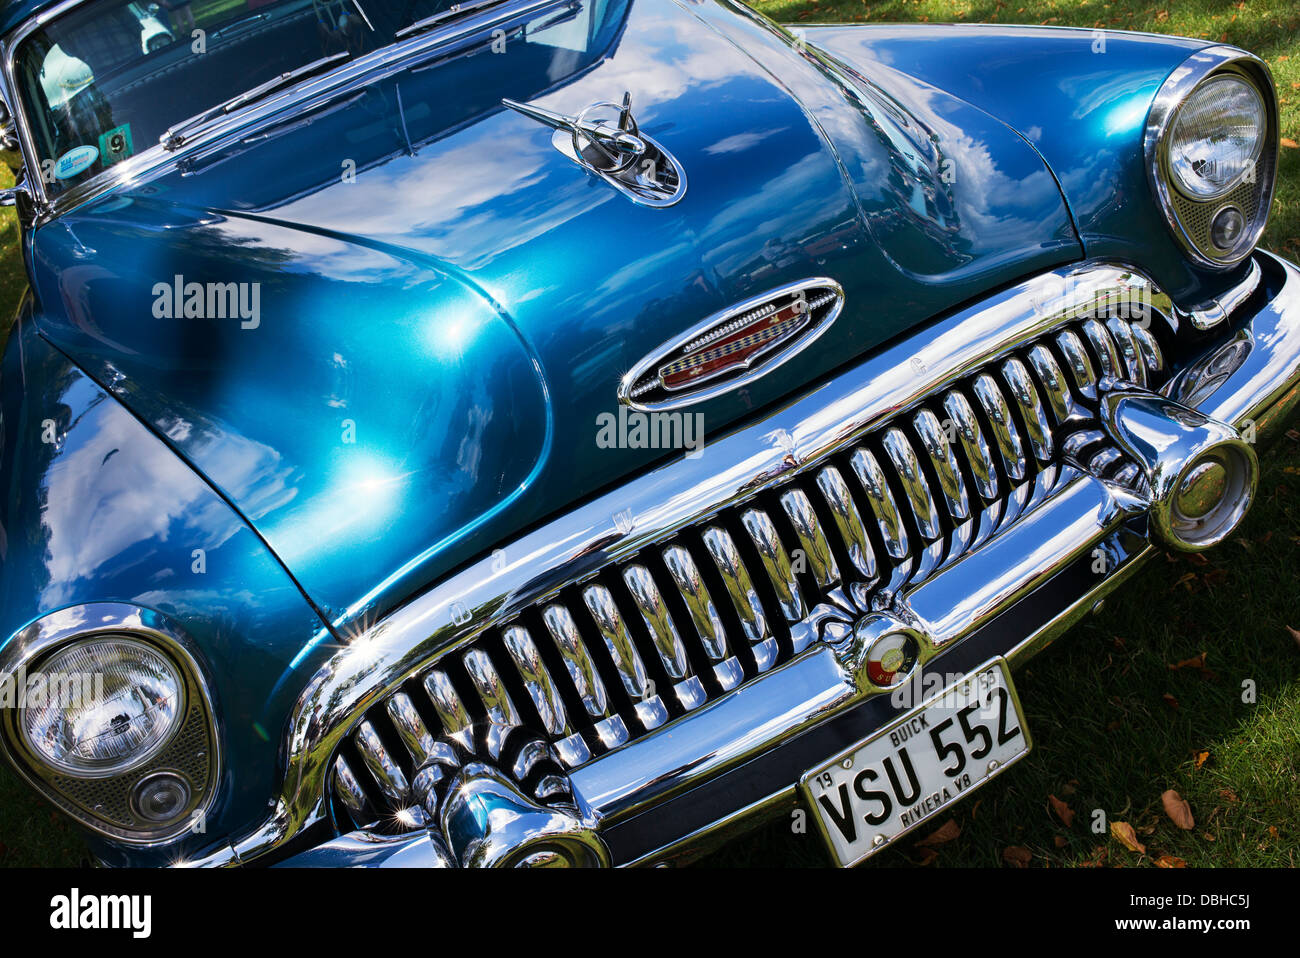 1953 Buick Riviera V8 front end. Classic American car Foto Stock